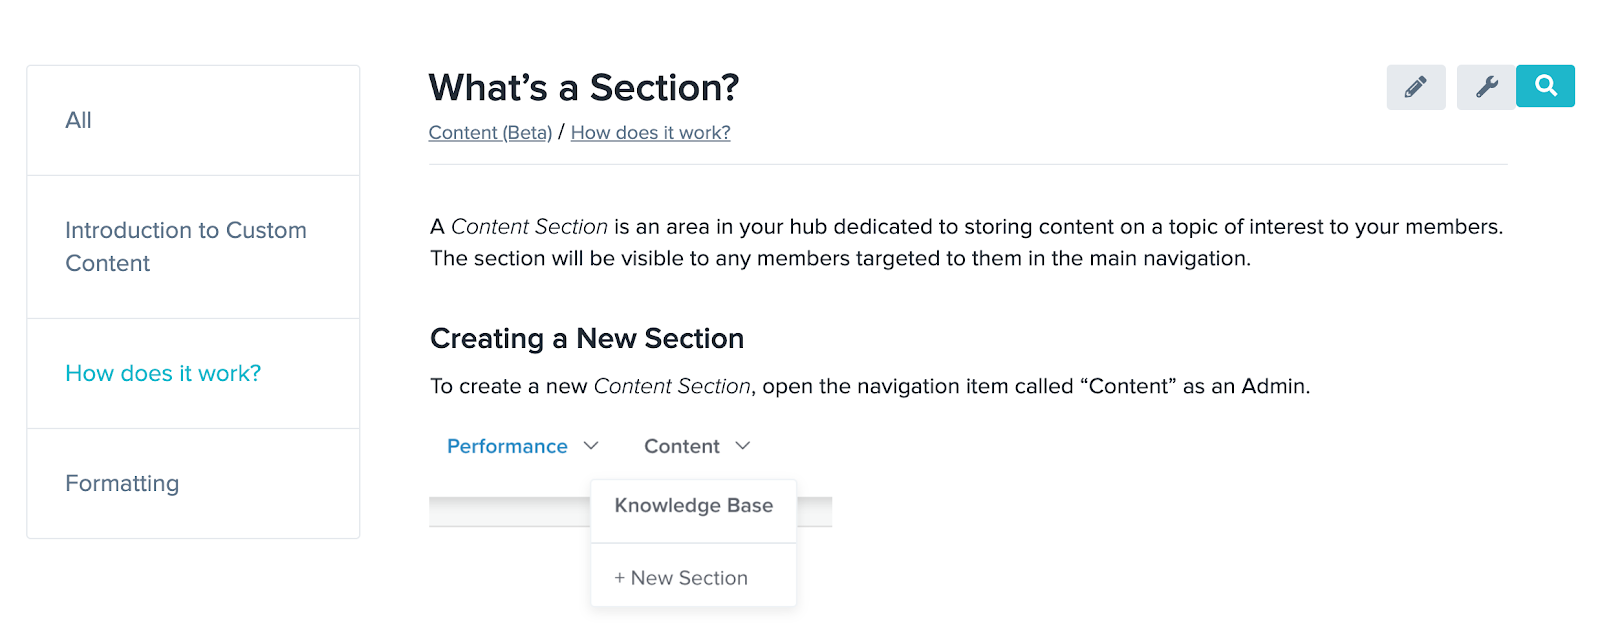 This is an example of a knowledge base page using the new Custom Content